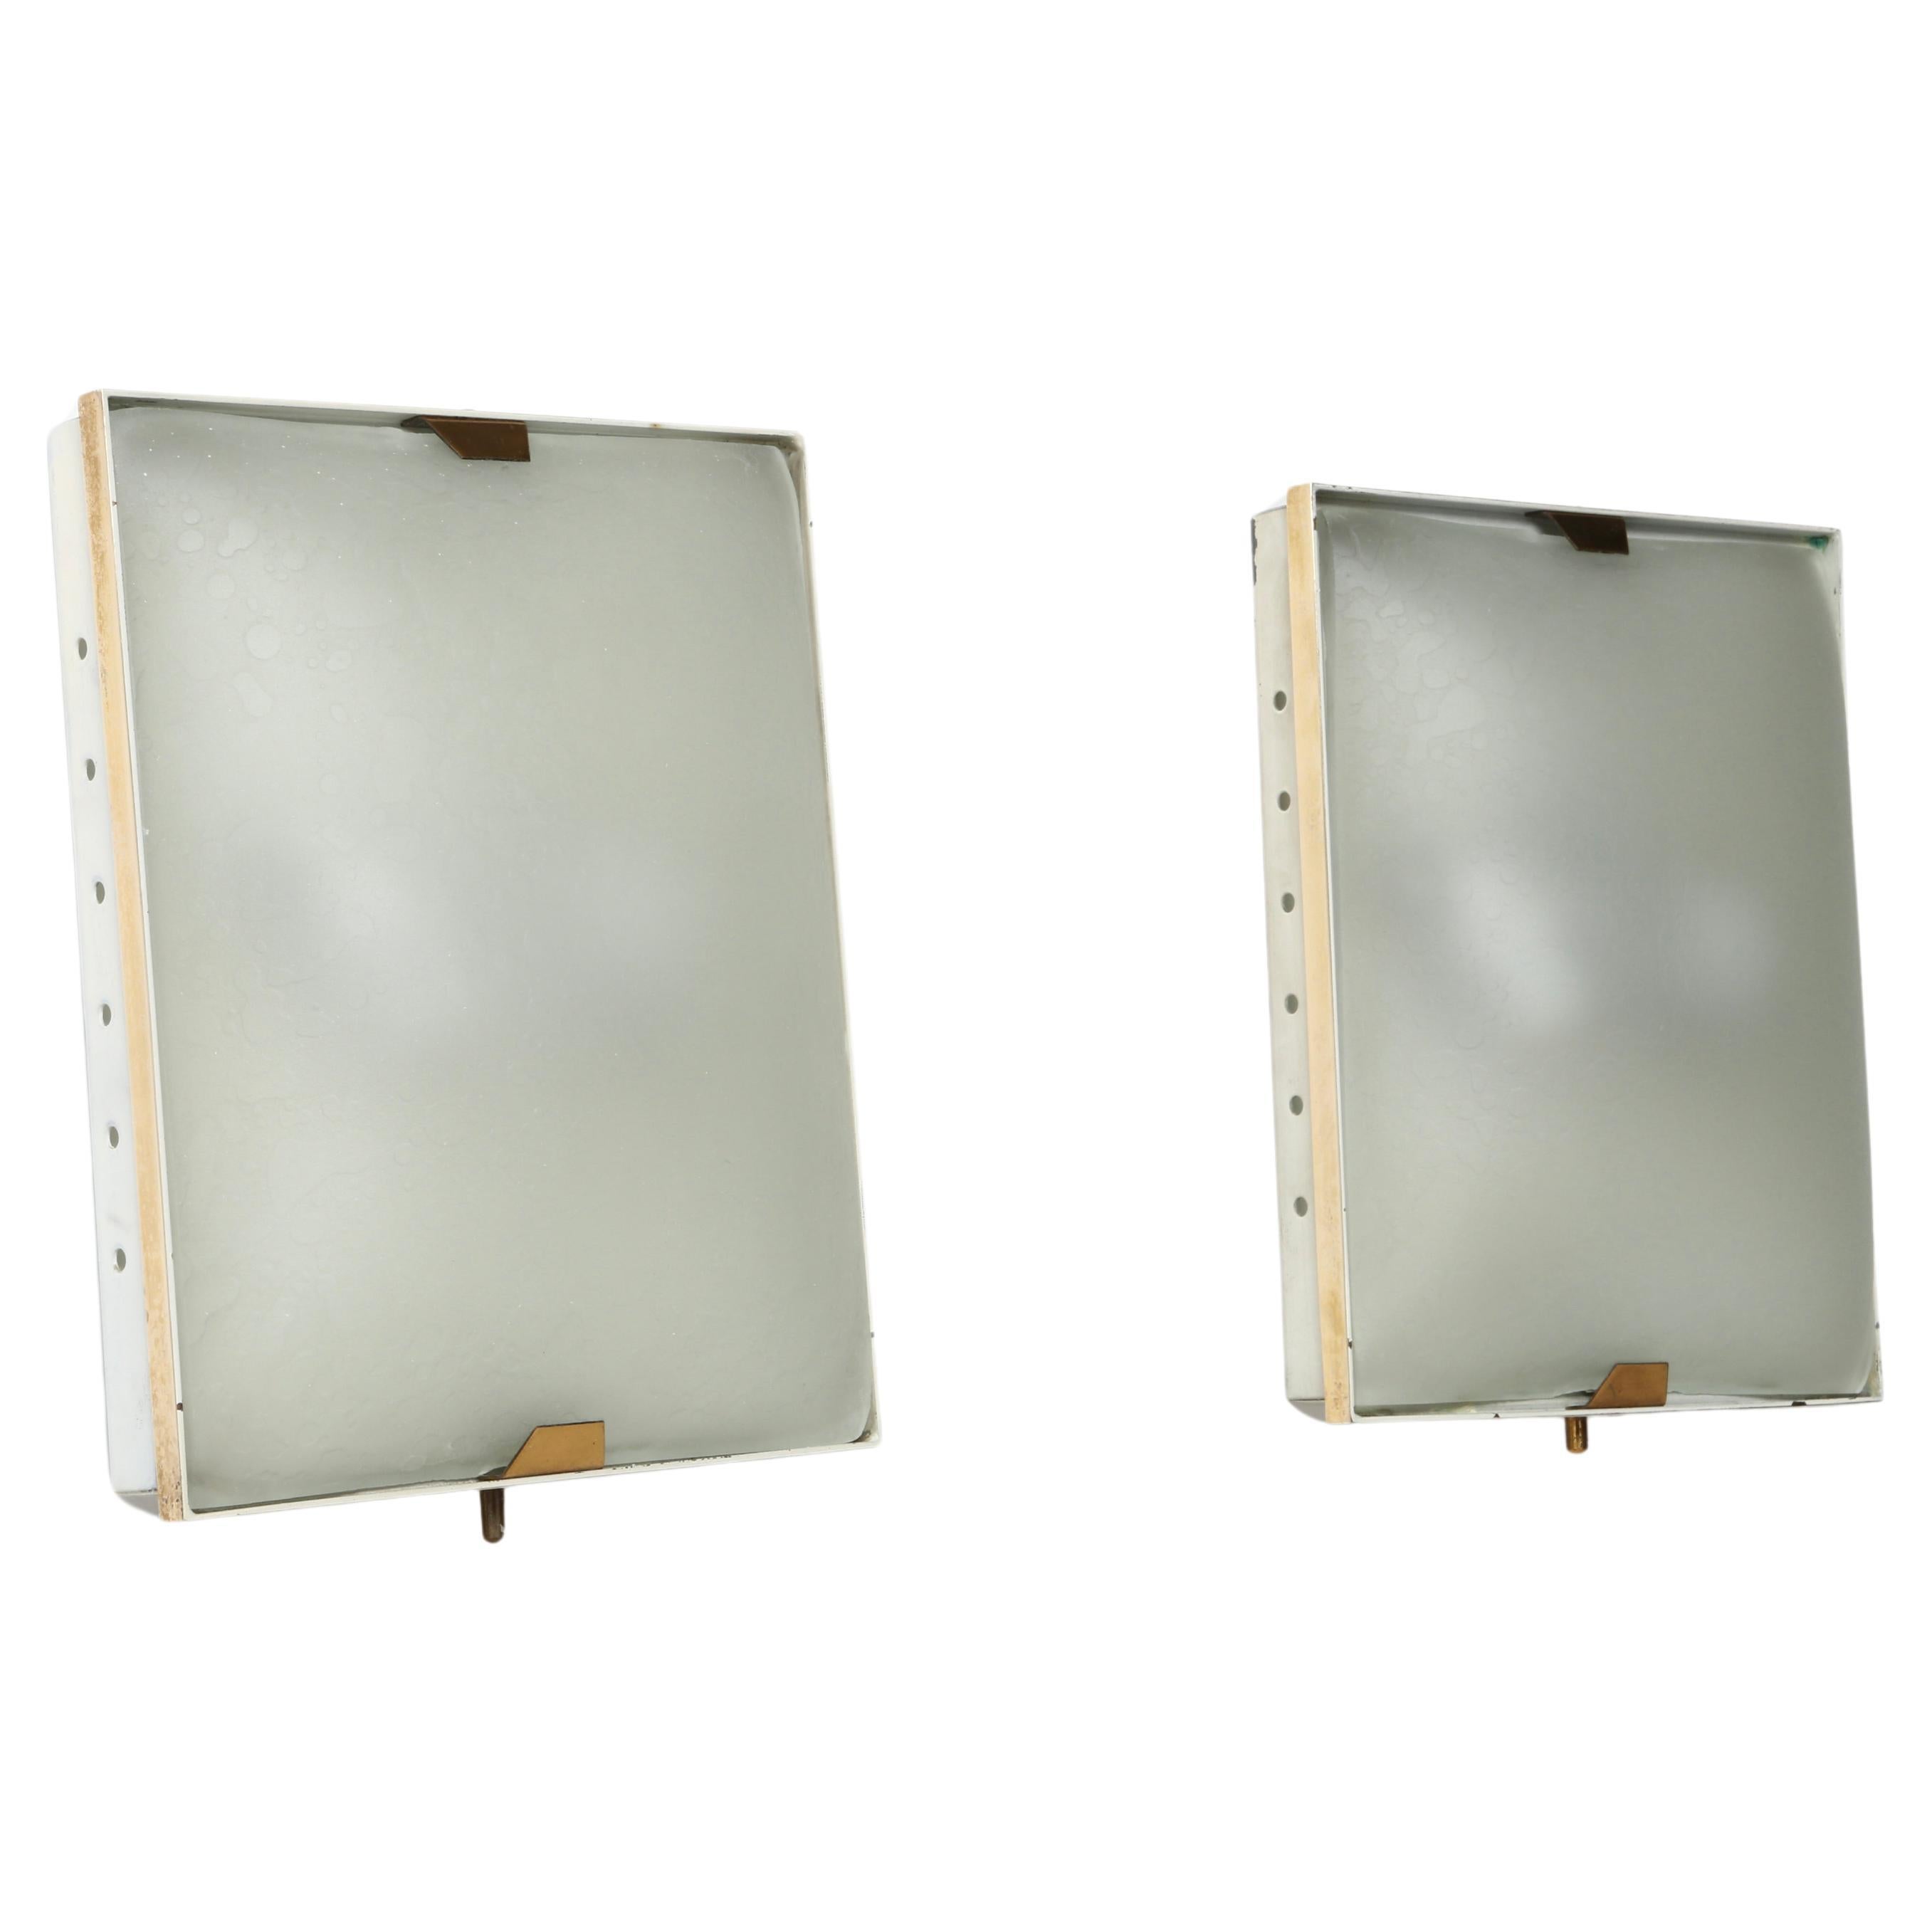 Stilnovo Wall Lights, a pair For Sale